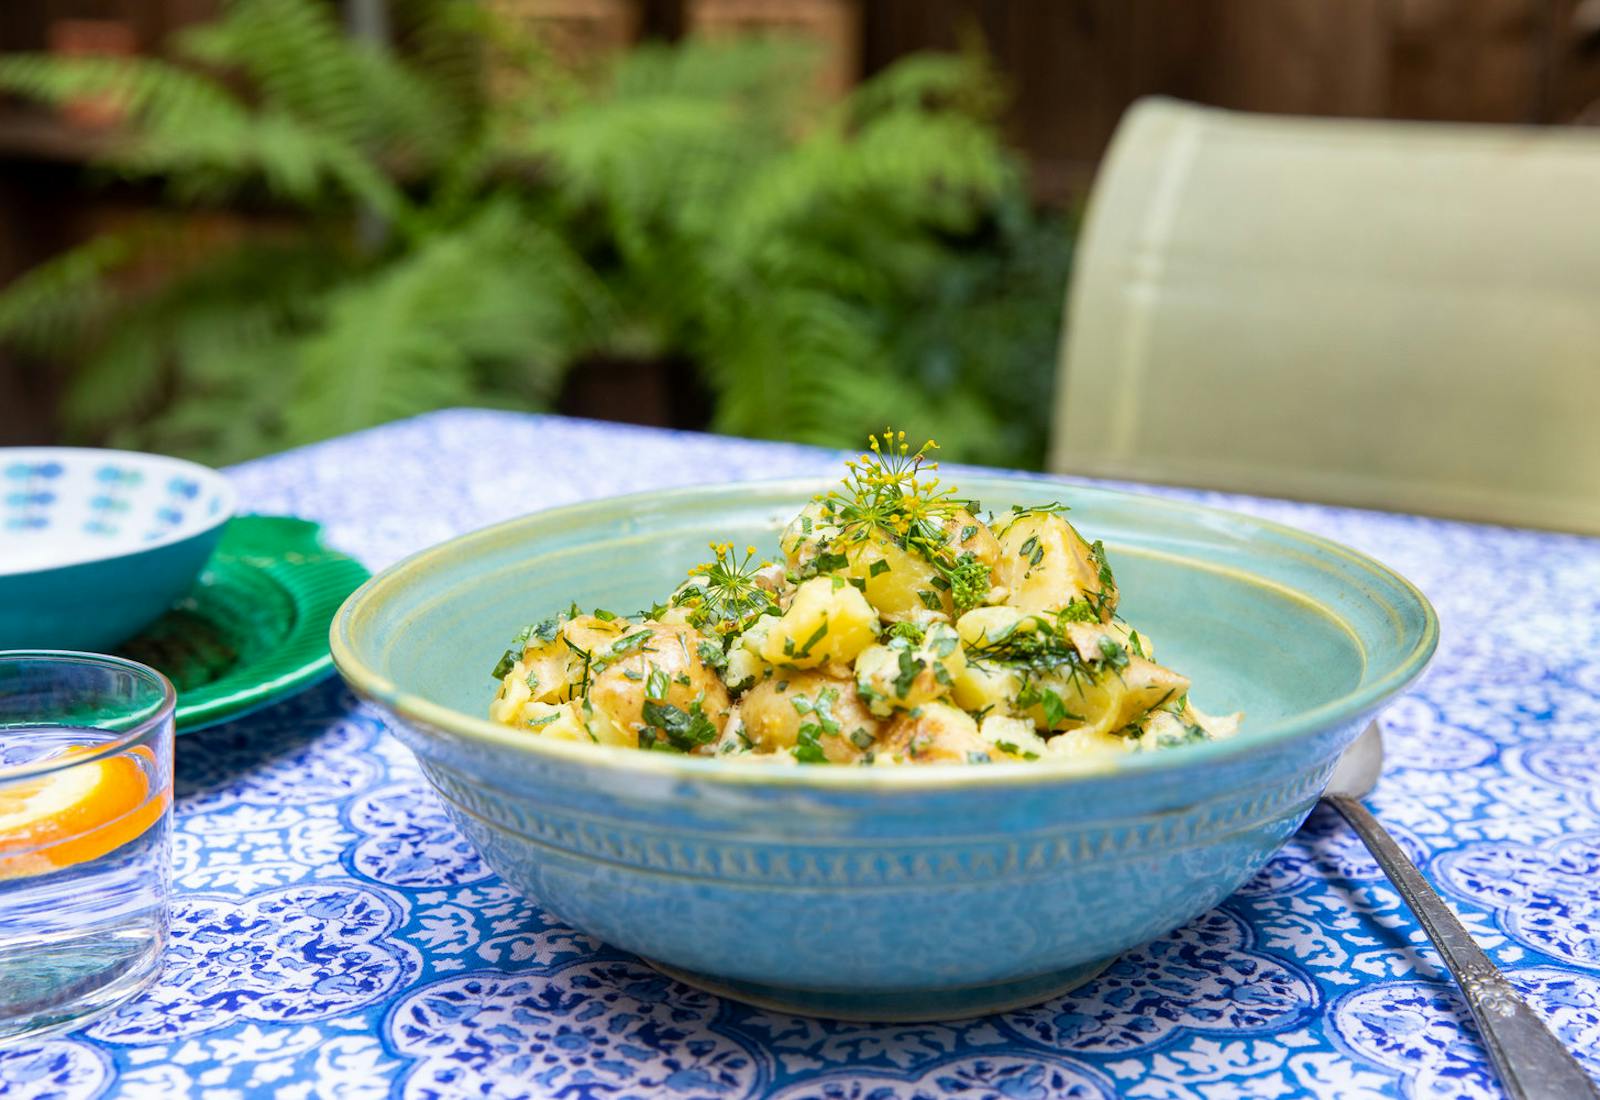 Potato salad with fresh herbs in blue ceramic bowl atop blue patterned tablecloth, outdoor scene.